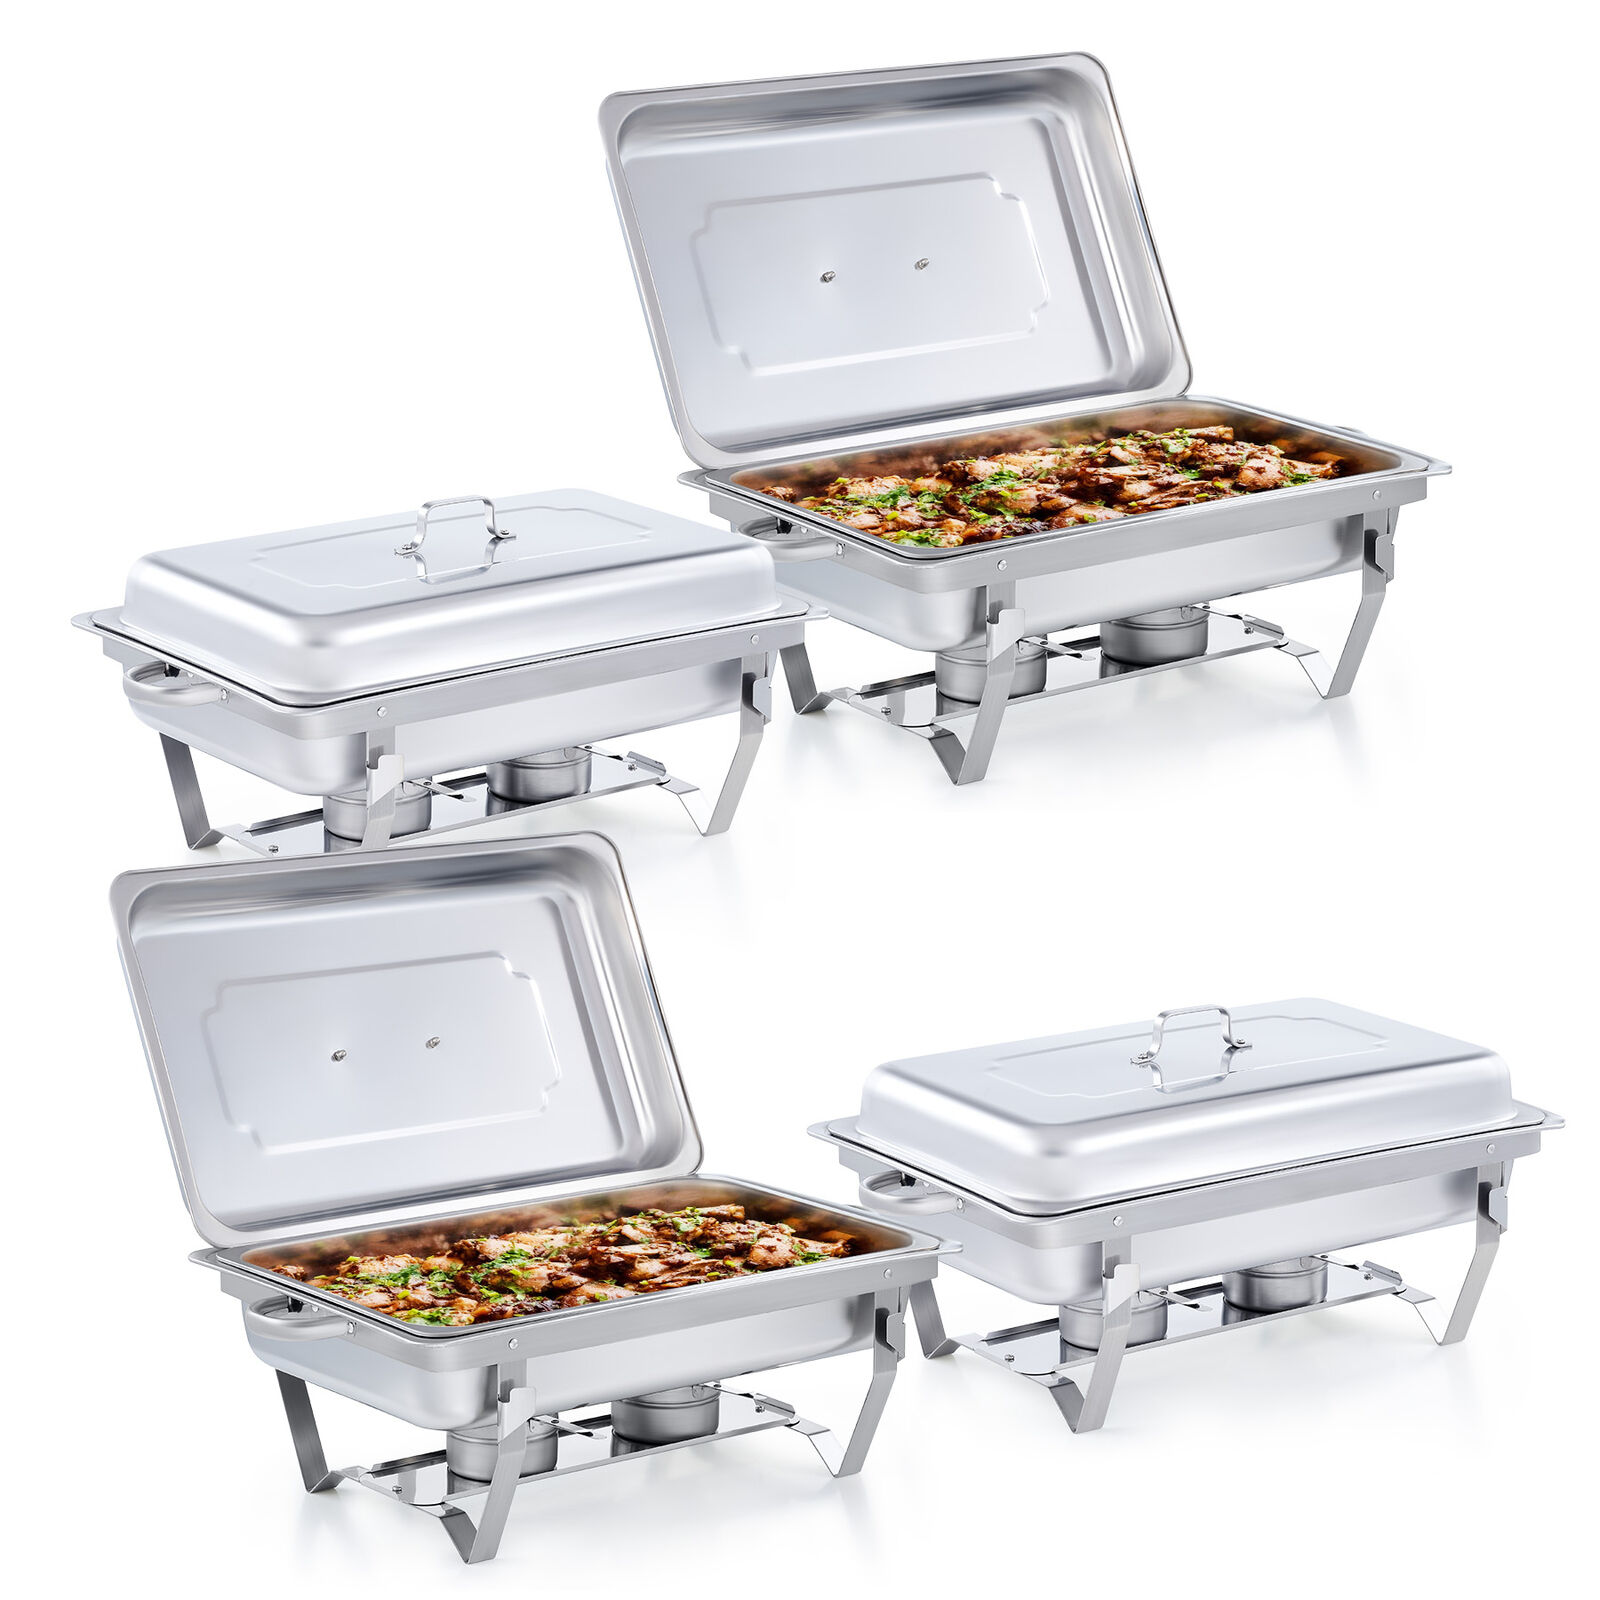 4 Pack 13.7Qt Stainless Steel Chafer Chafing Dish Sets Bain Marie Food Warmer